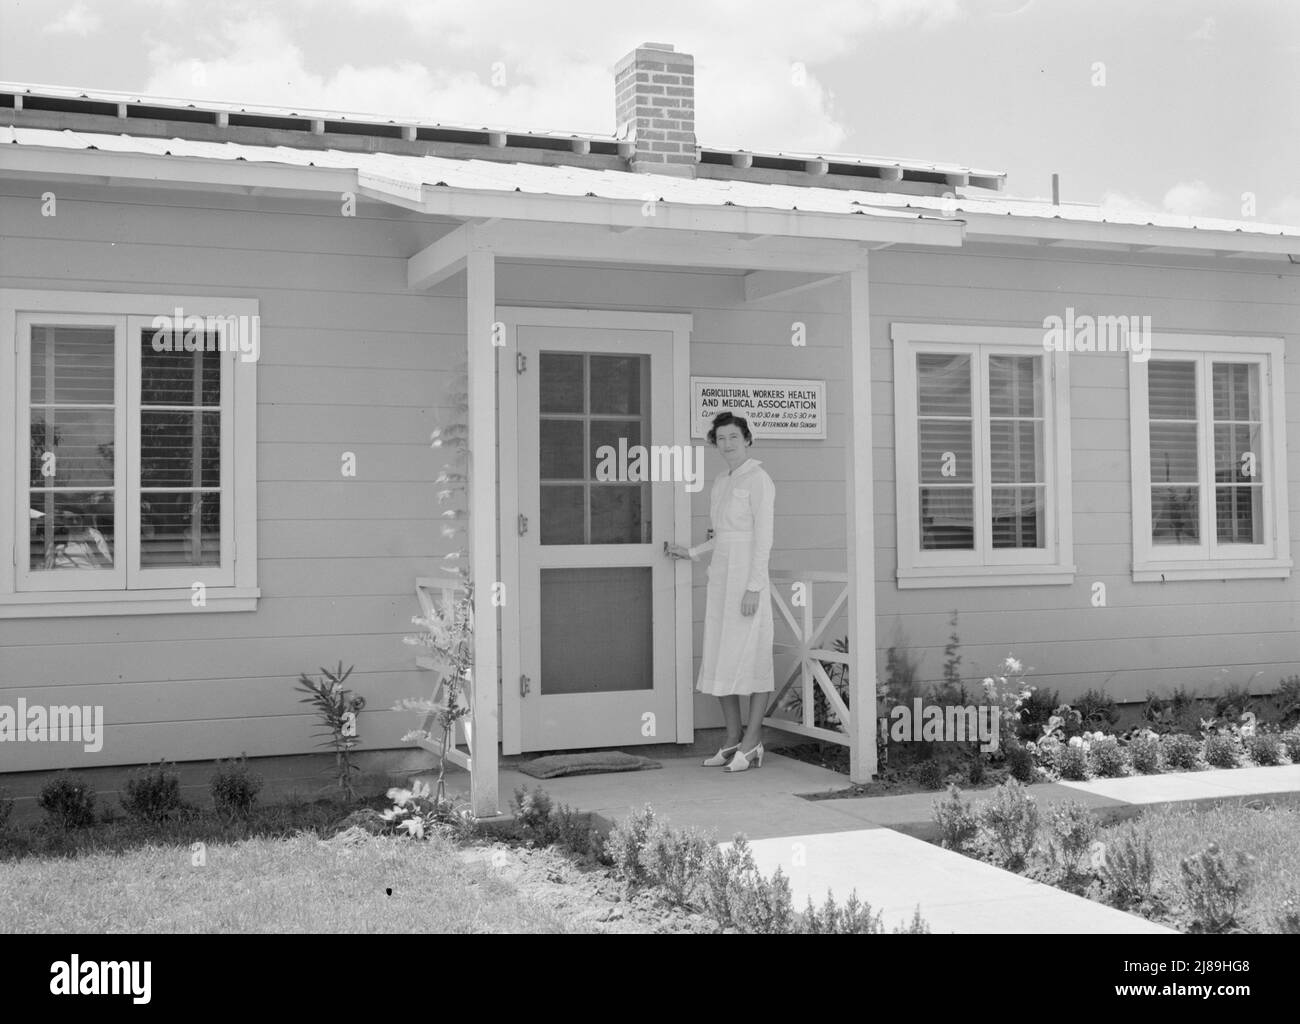 Tulare County, California. Farm Security Administration (FSA) camp for migratory agricultural workers at Farmersville. Resident nurse and clinic building of Agricultural Workers' Health and Medical Association. Stock Photo